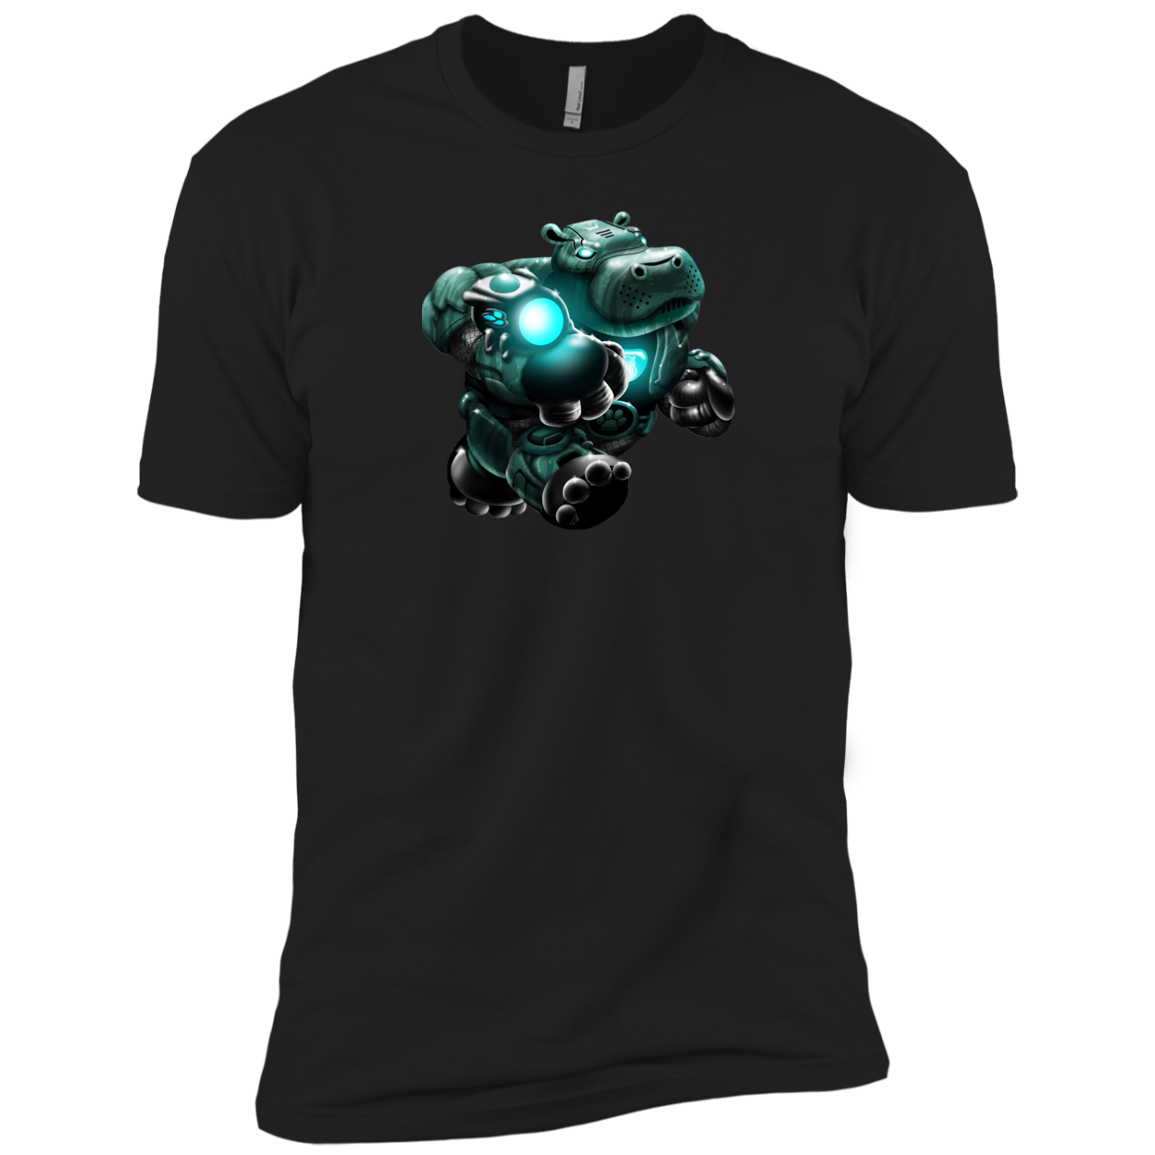 Teal T-Shirt for Boys - Dark Corps